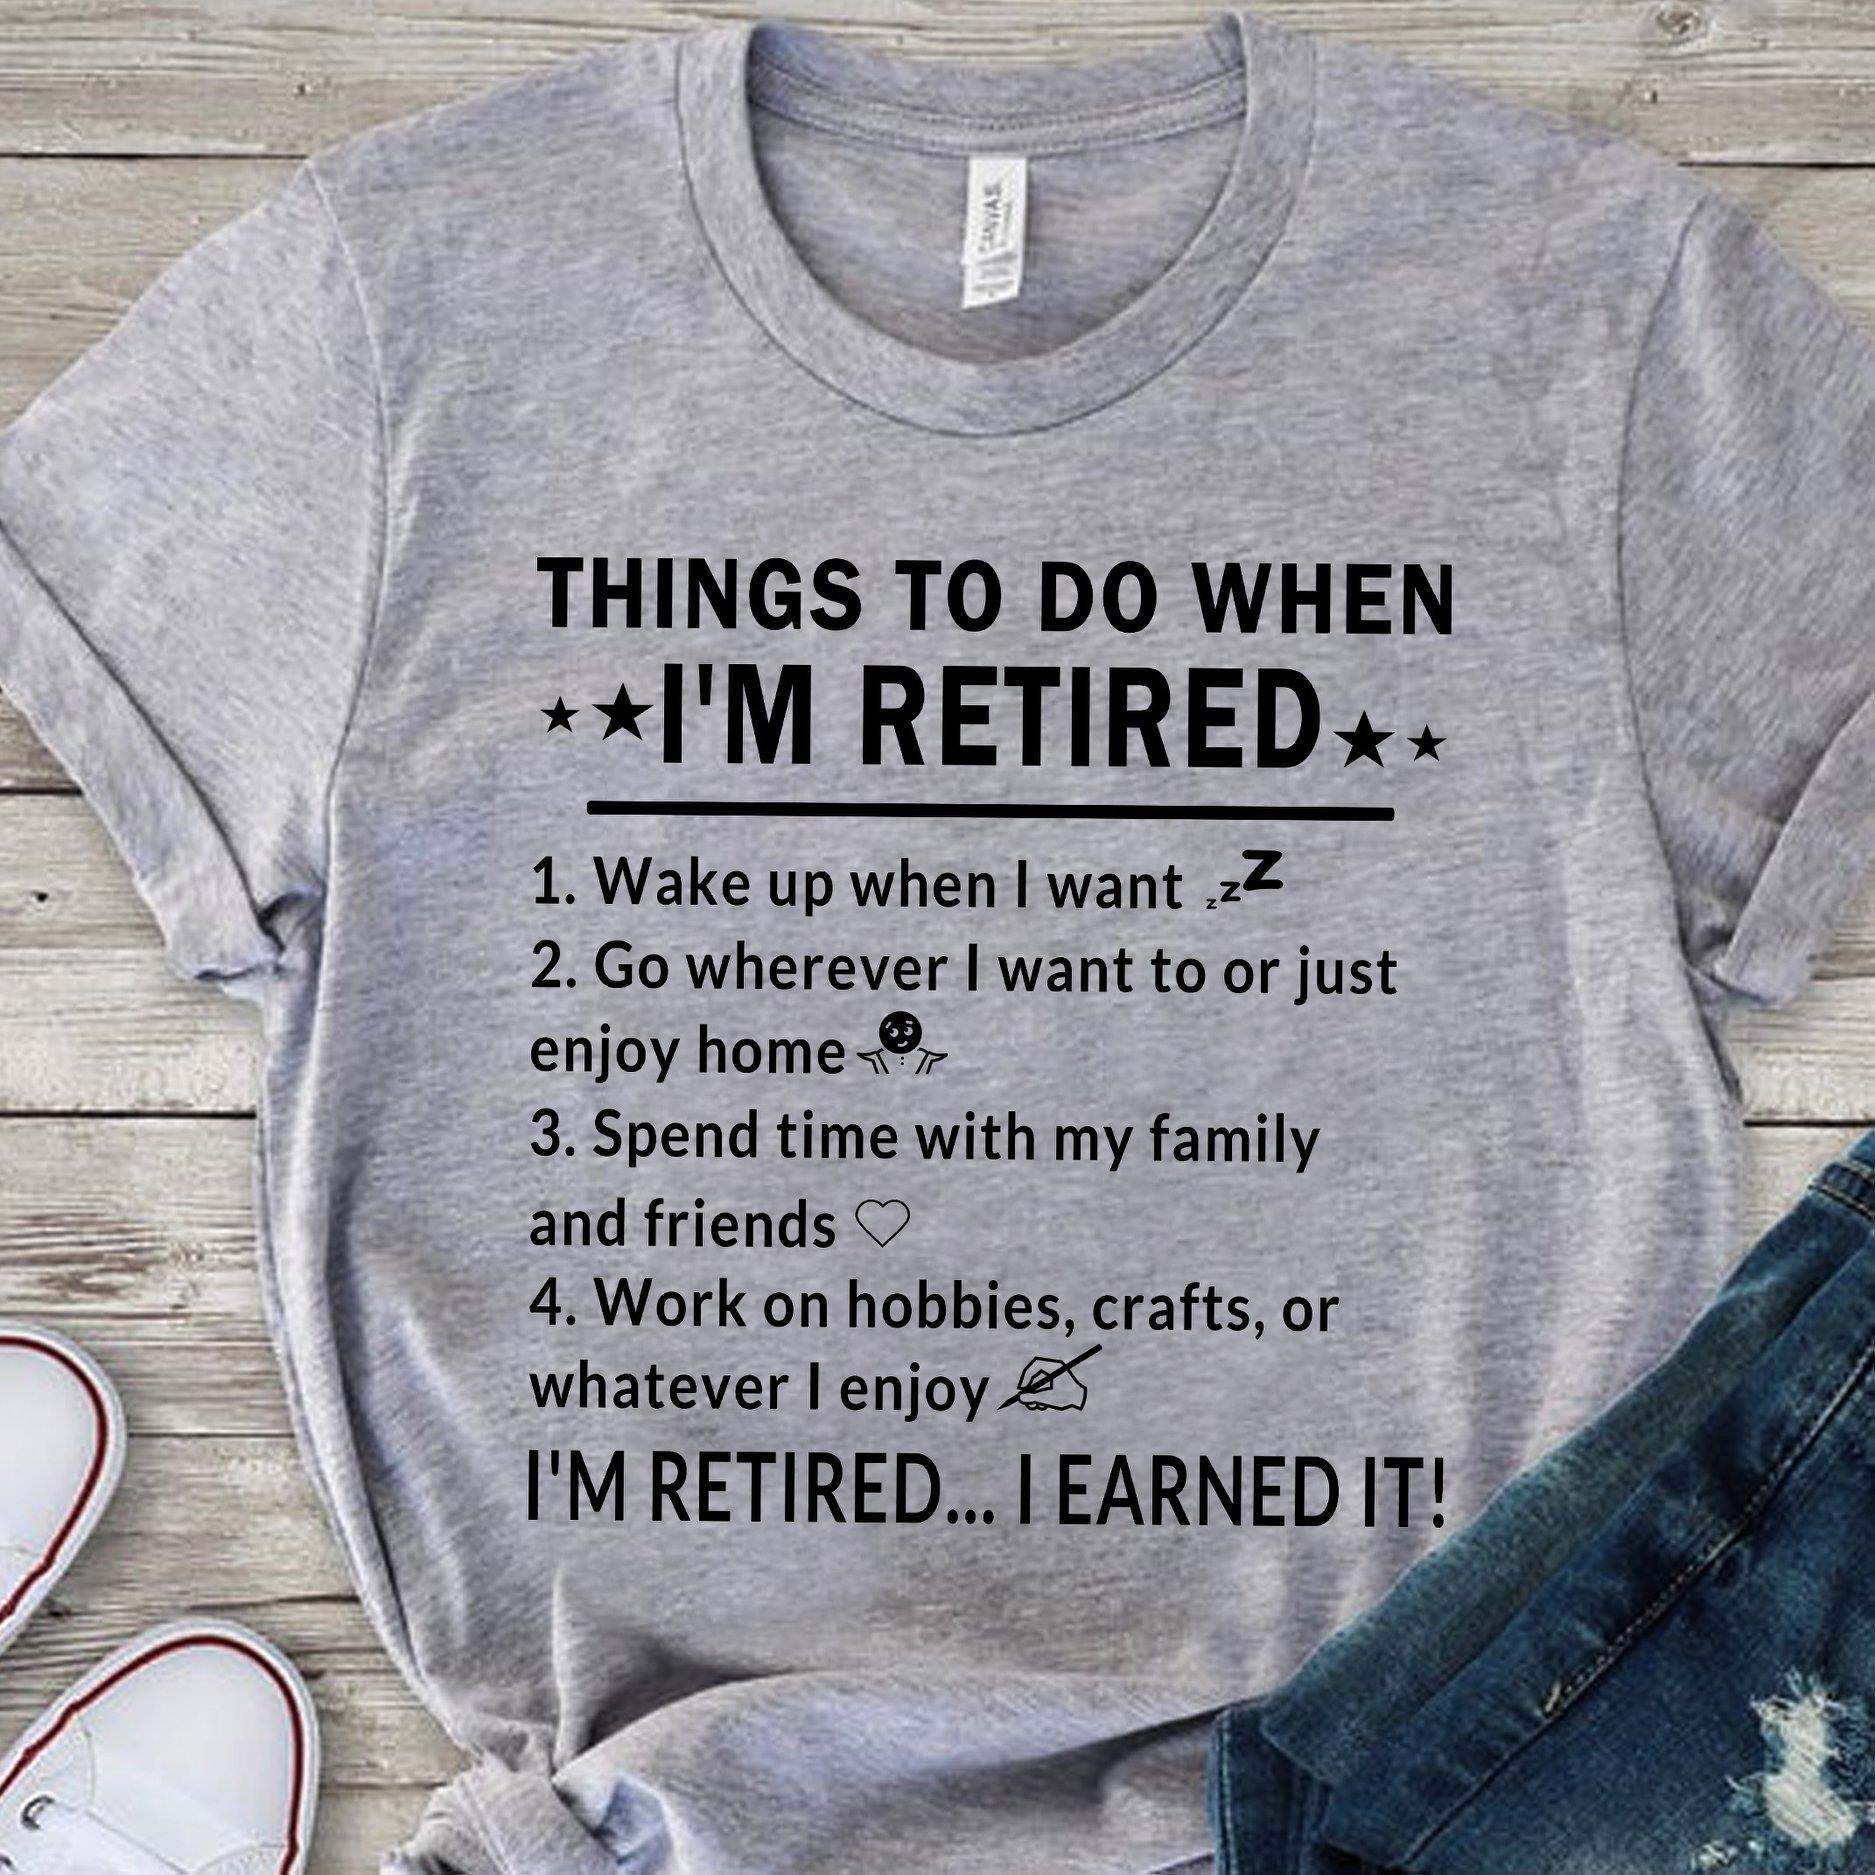 Things to do when I'm retired wake up when i want i'm retired i earned it